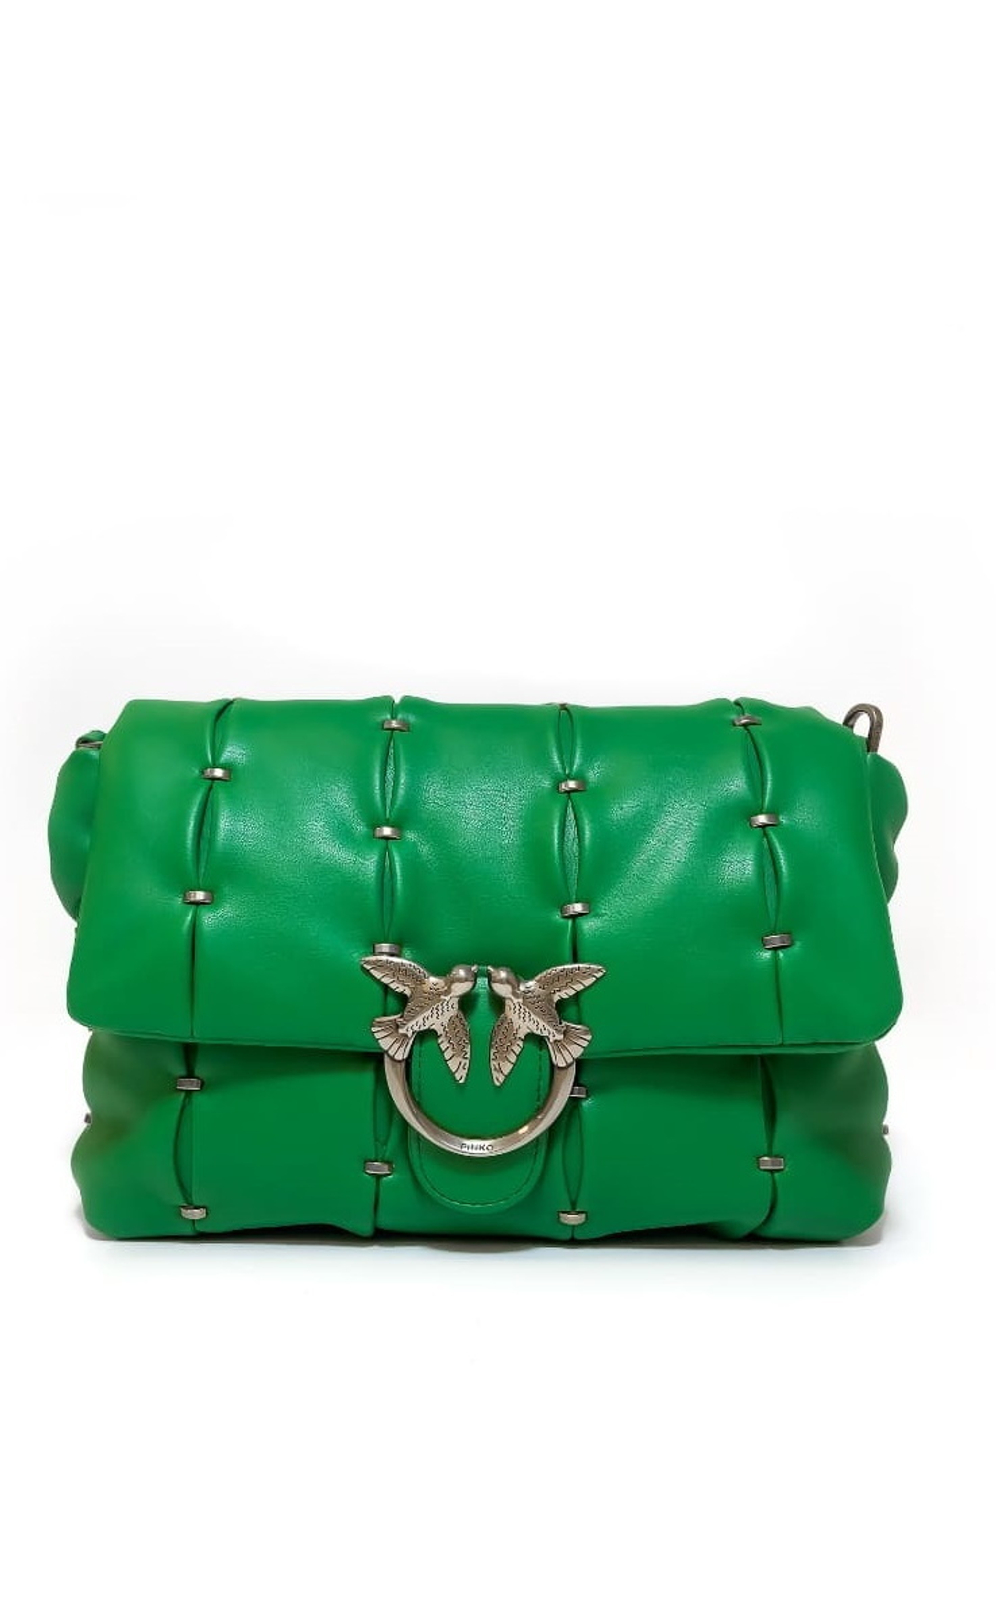 CLASSIC LOVE BAG PUFF PINCHED – green